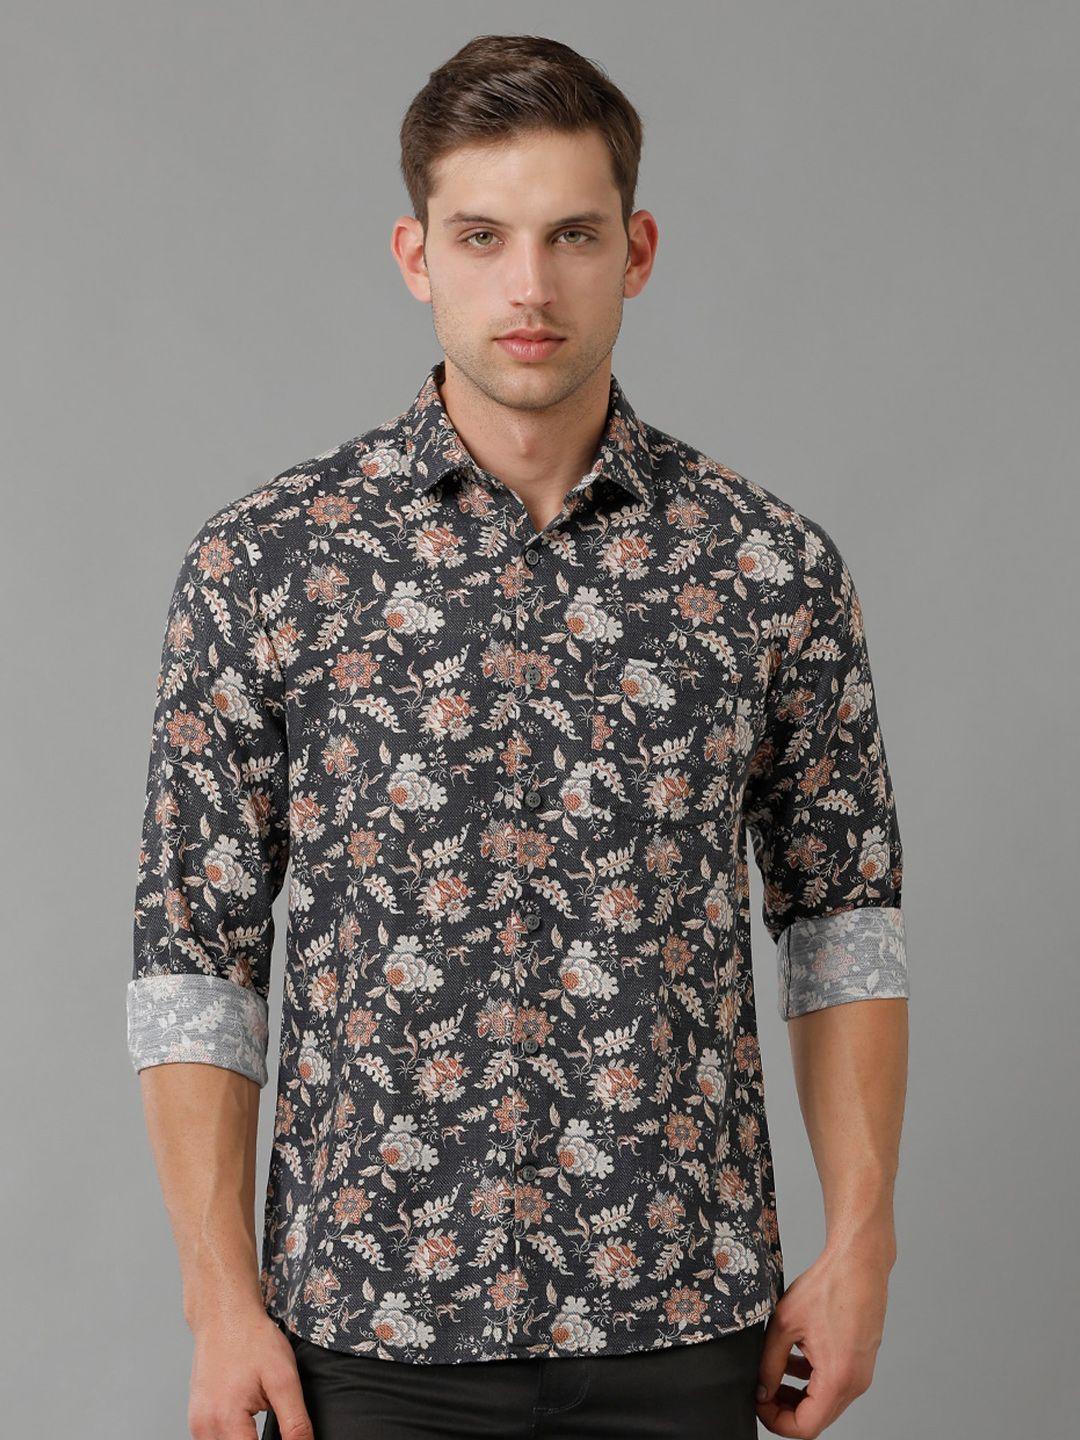 linen club contemporary floral pure linen printed casual shirt